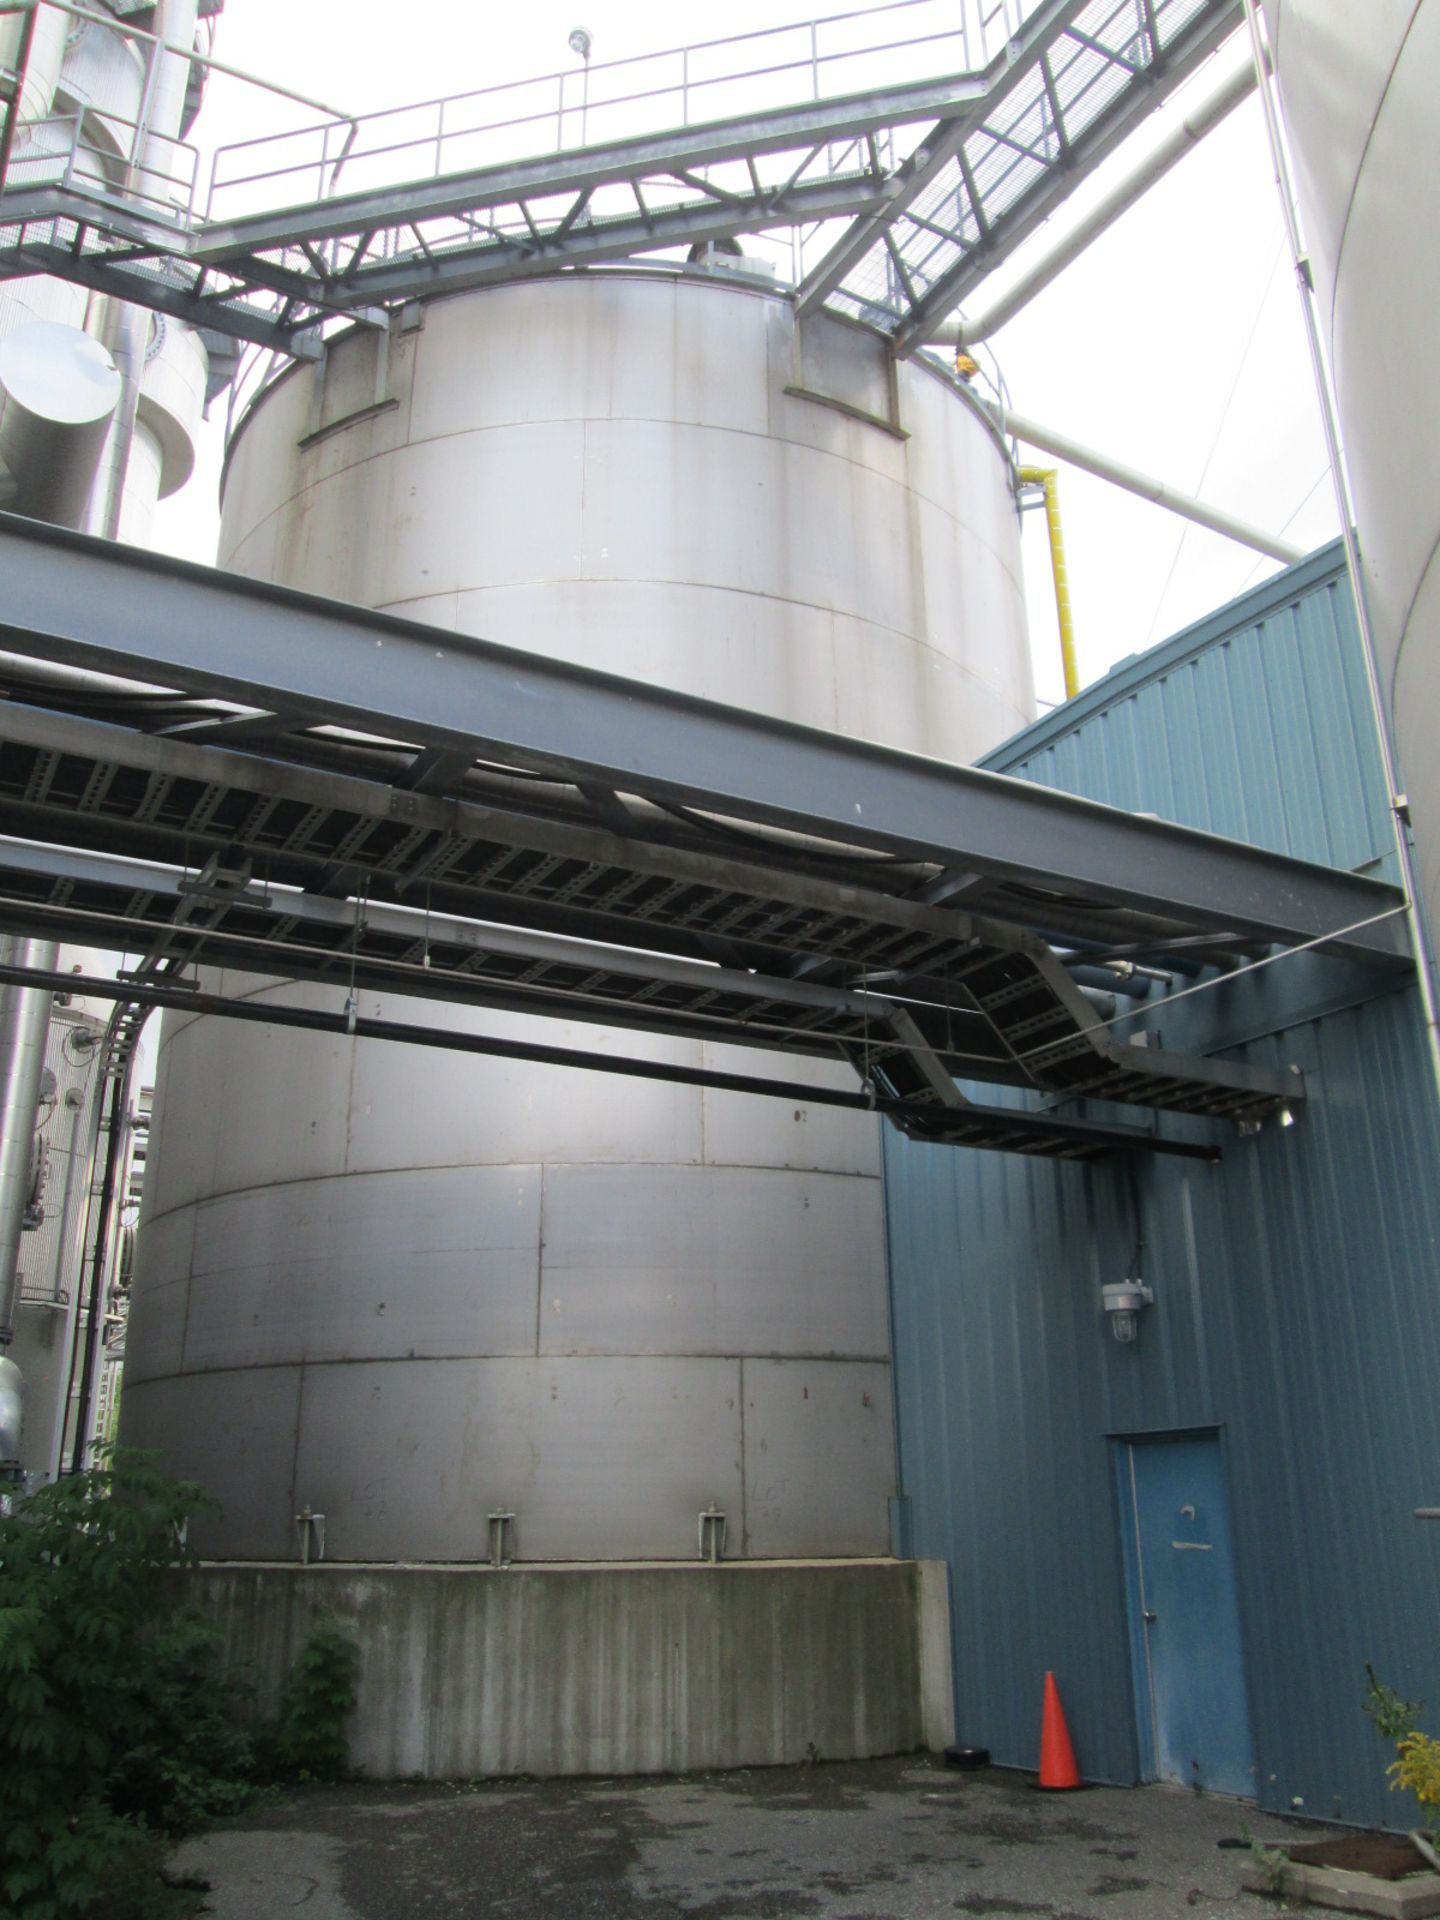 250,000 Gallon Stainless Steel Tank with Agitator - Image 2 of 13